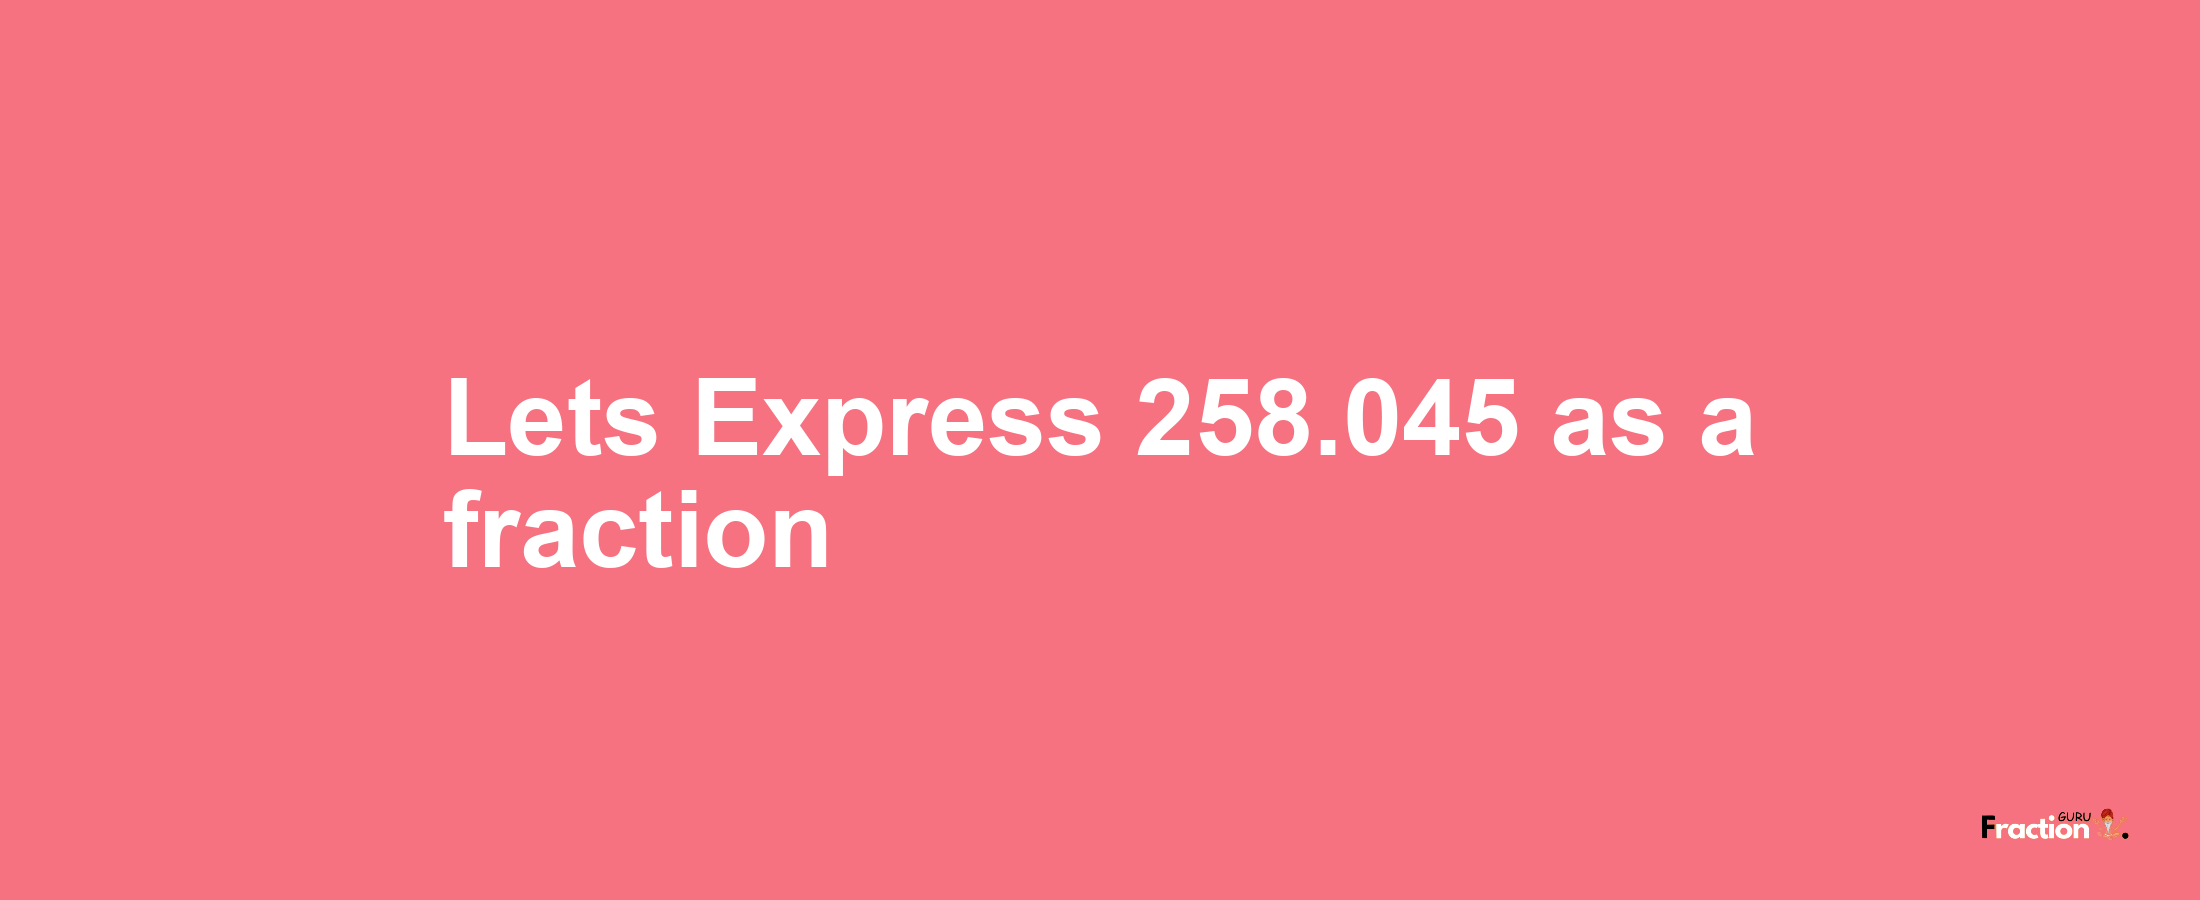 Lets Express 258.045 as afraction